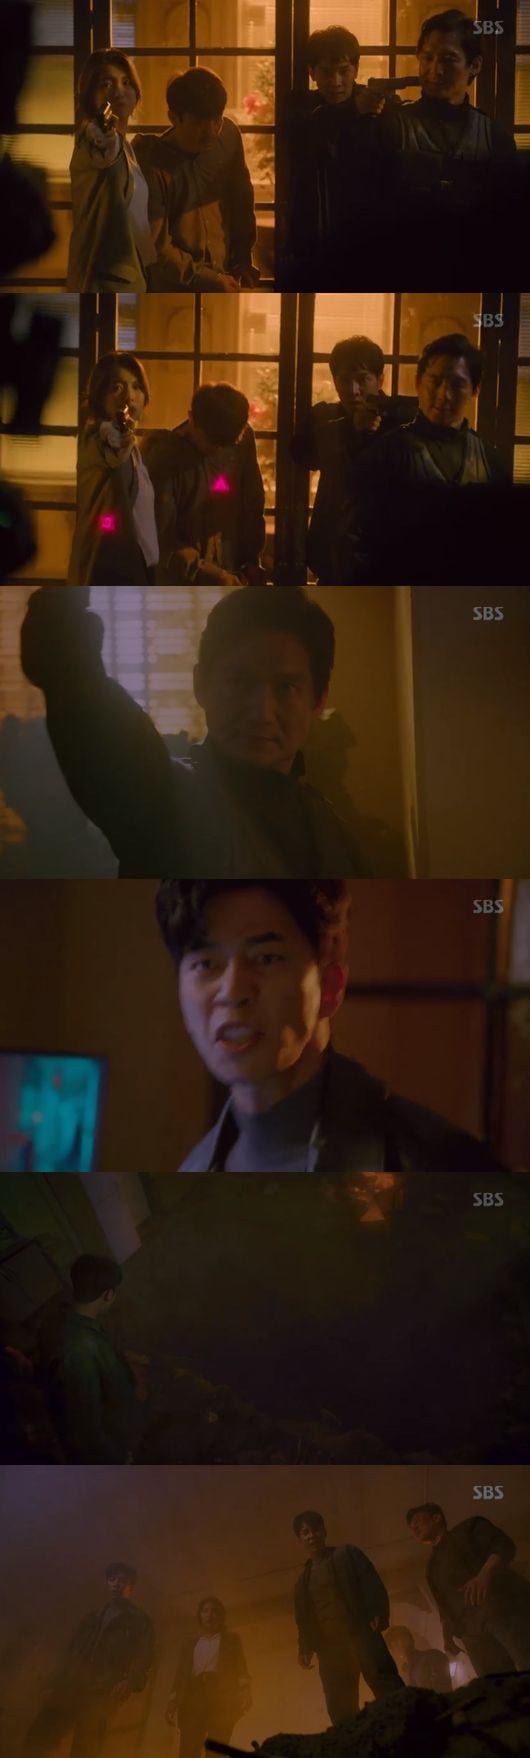 Shin Sung-rok saved Lee Seung-gi and Bae SuzyOn SBSs Friday-Thursday drama Vagabond, Gitaewoong (Shin Sung-rok) was shown saving Cha Dal-gun (Lee Seung-gi)a Gohari (Bae Suzy) without receiving the name of the Nationality.On the same day, President Chung Kook-pyo (Baek Yoon-sak) appeared at the plenary session and started his speech, and Hwang Pil-yong (Yutaewoong) pointed a gun at Gohari (Bae Suzy), Cha Dal-gun (Lee Seung-gi), and Kim Woo-gi (Jang Hyuk-jin), saying, Why the hell are you doing this?I was able to escape safely when the fire broke out in the room.At that time, Shin Sung-rok appeared and pointed a gun in front of Gohari and Chadalgun, but Kitaewoong was a man of Hwang Pil-yong who tried to kill them, not Kohari and Chadalgun.With the help of Kitaewoong, he managed to escape Danger, but the tension was heightened by the continued shooting with Hwang Pil-yong and his men.In Danger, Chadalgan said, Hey, you guys dont know youre got a Bomb. If I dont stop this timer, fly all over here. Think about it.If you write the wrong head, you will go through the whole thing. How will you stop the Bomb? But Hwang Pil-yong did not believe it and the Bomb burst.Fortunately, Cha Dal-gun, Kitawoong, Gohari, Kim Se-hoon, and Kim Woo-ki survived and Hwang Pil-yong and his men, who were barely alive due to Bomb, were killed by Kitaoong.Kill both of you.Vagabond broadcast screen capture